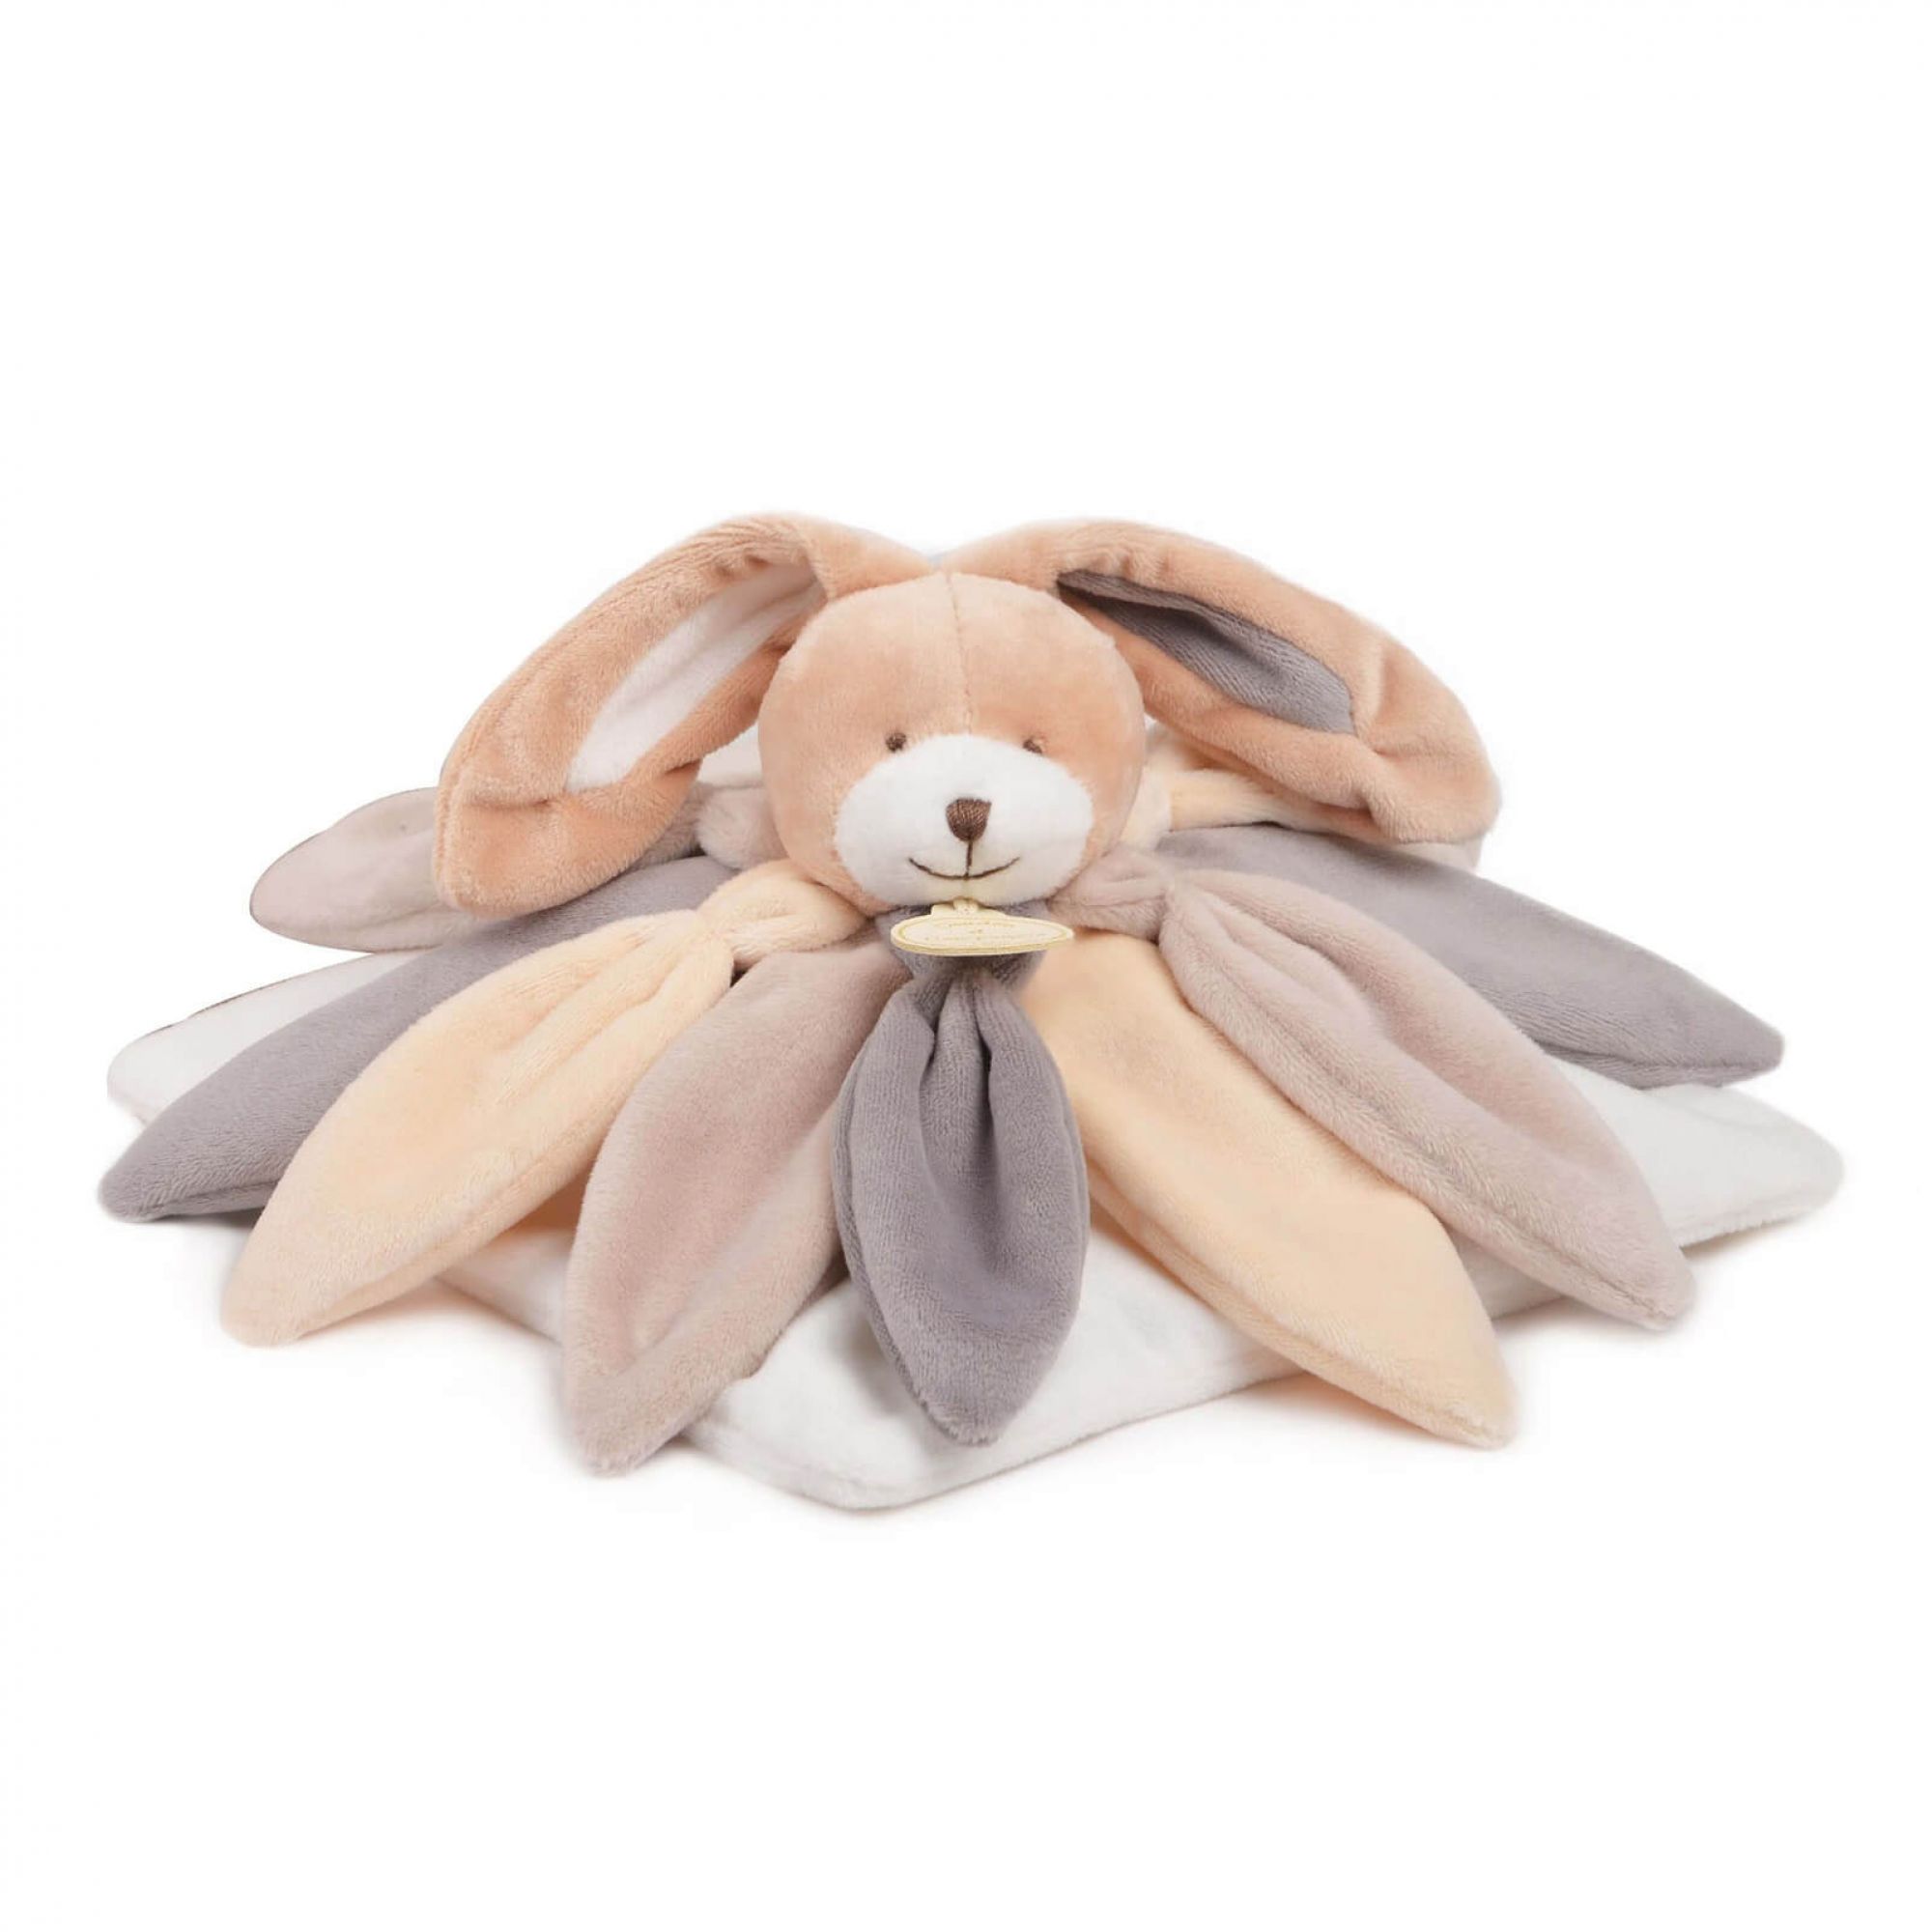 https://www.madeinbebe.com/boutique/uploads/articles/zoom/doudou-collector-lapin-taupe-doudou-et-compagnie_OA.jpg